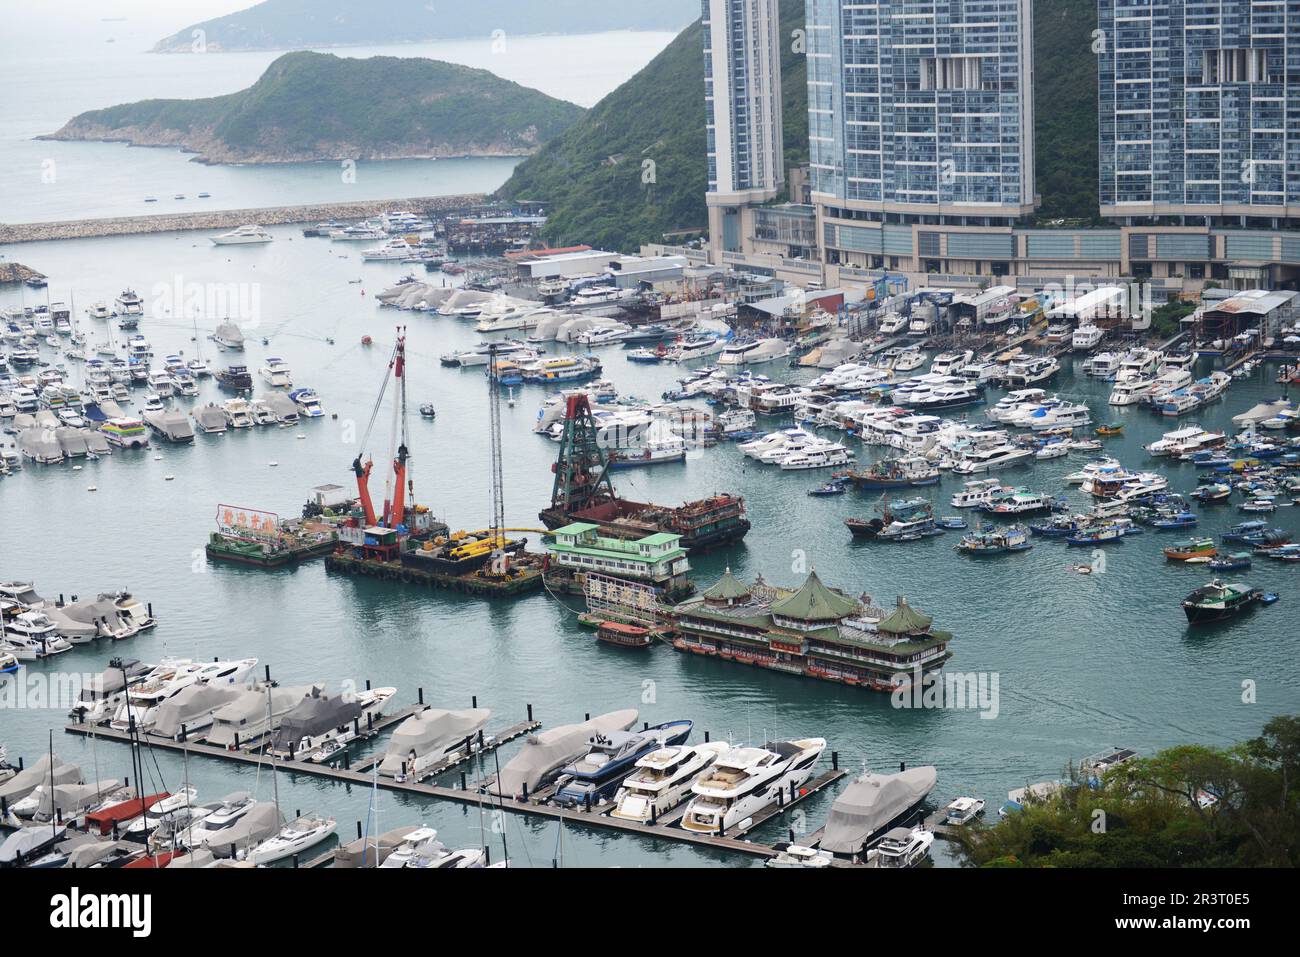 Yachts docking in the Aberdeen South Typhoon shelter, Sham Wan, Southern District, Hong Kong. Stock Photo